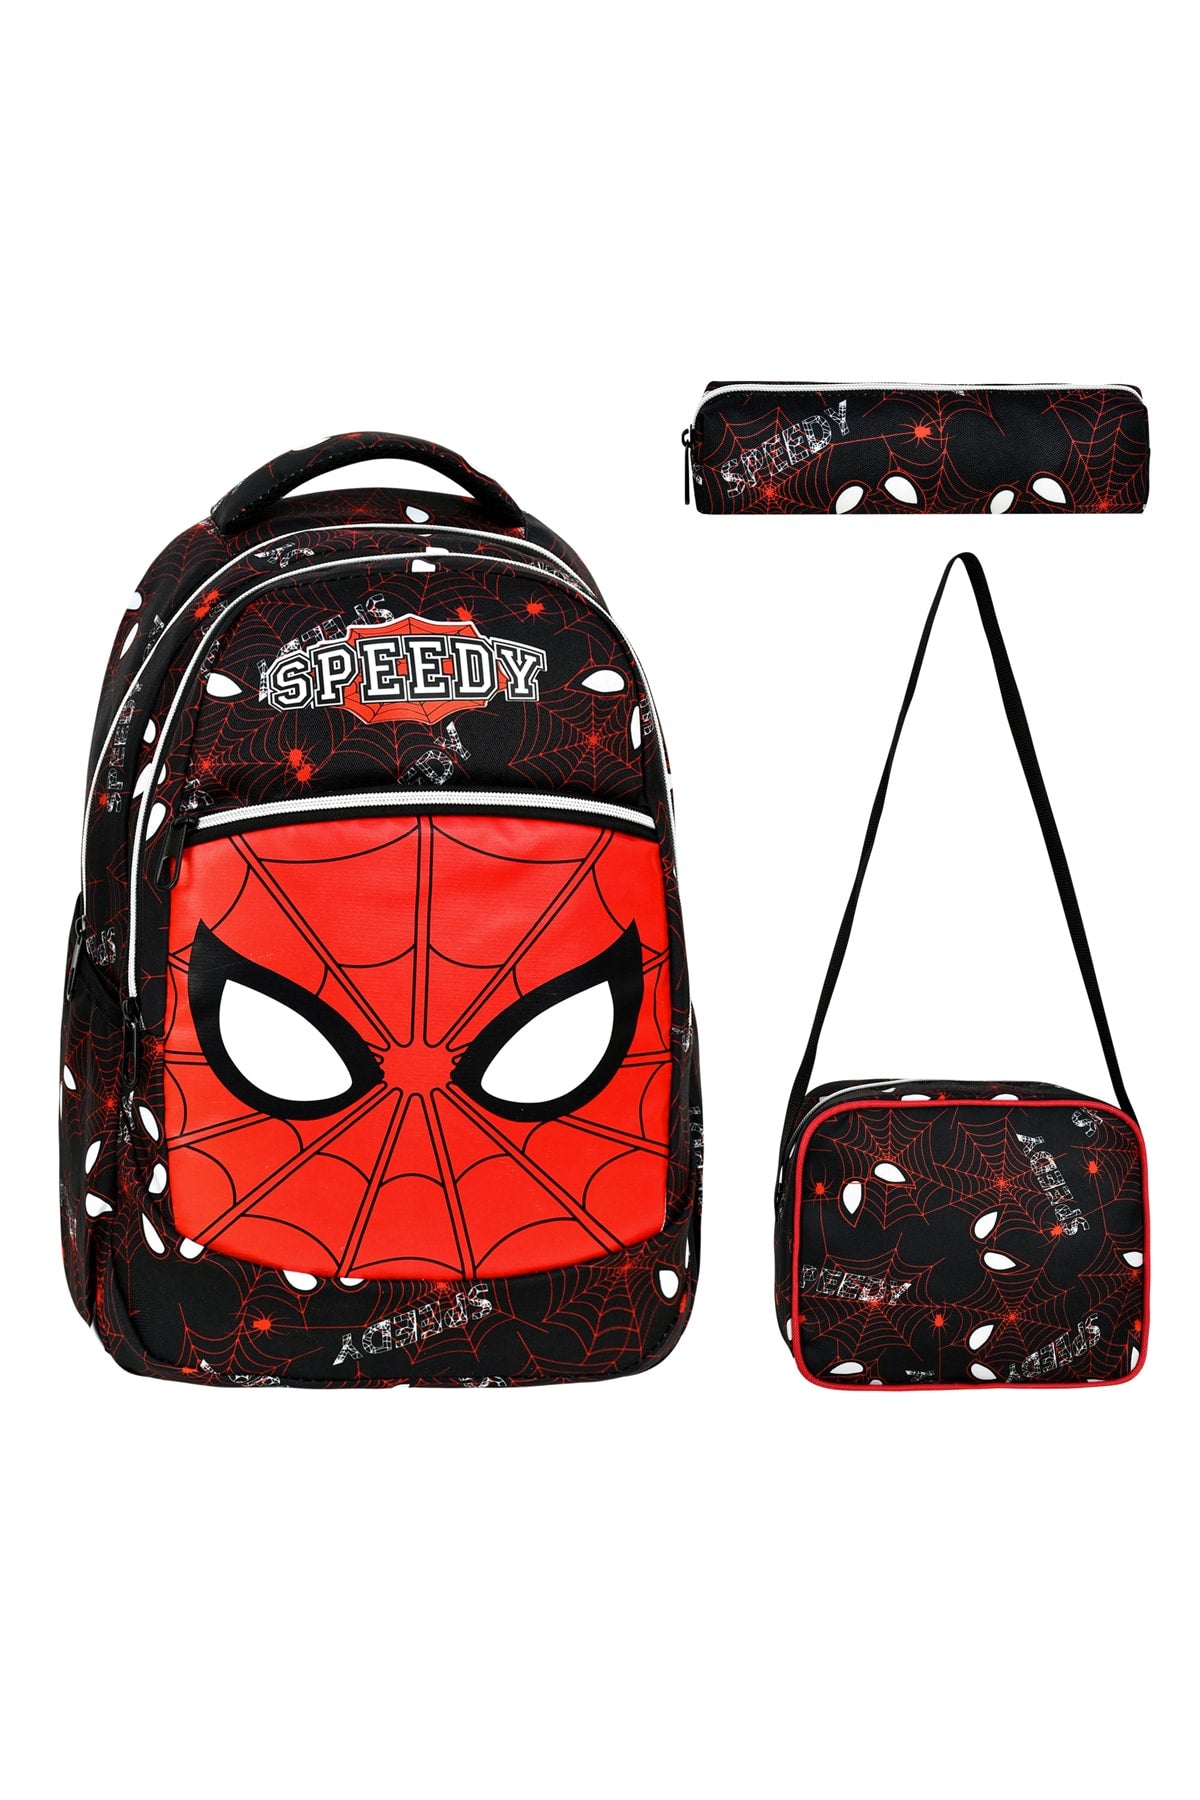 3-pack Primary School Spider-Man Patterned School Bag for Boys with Food and Pencil Holder